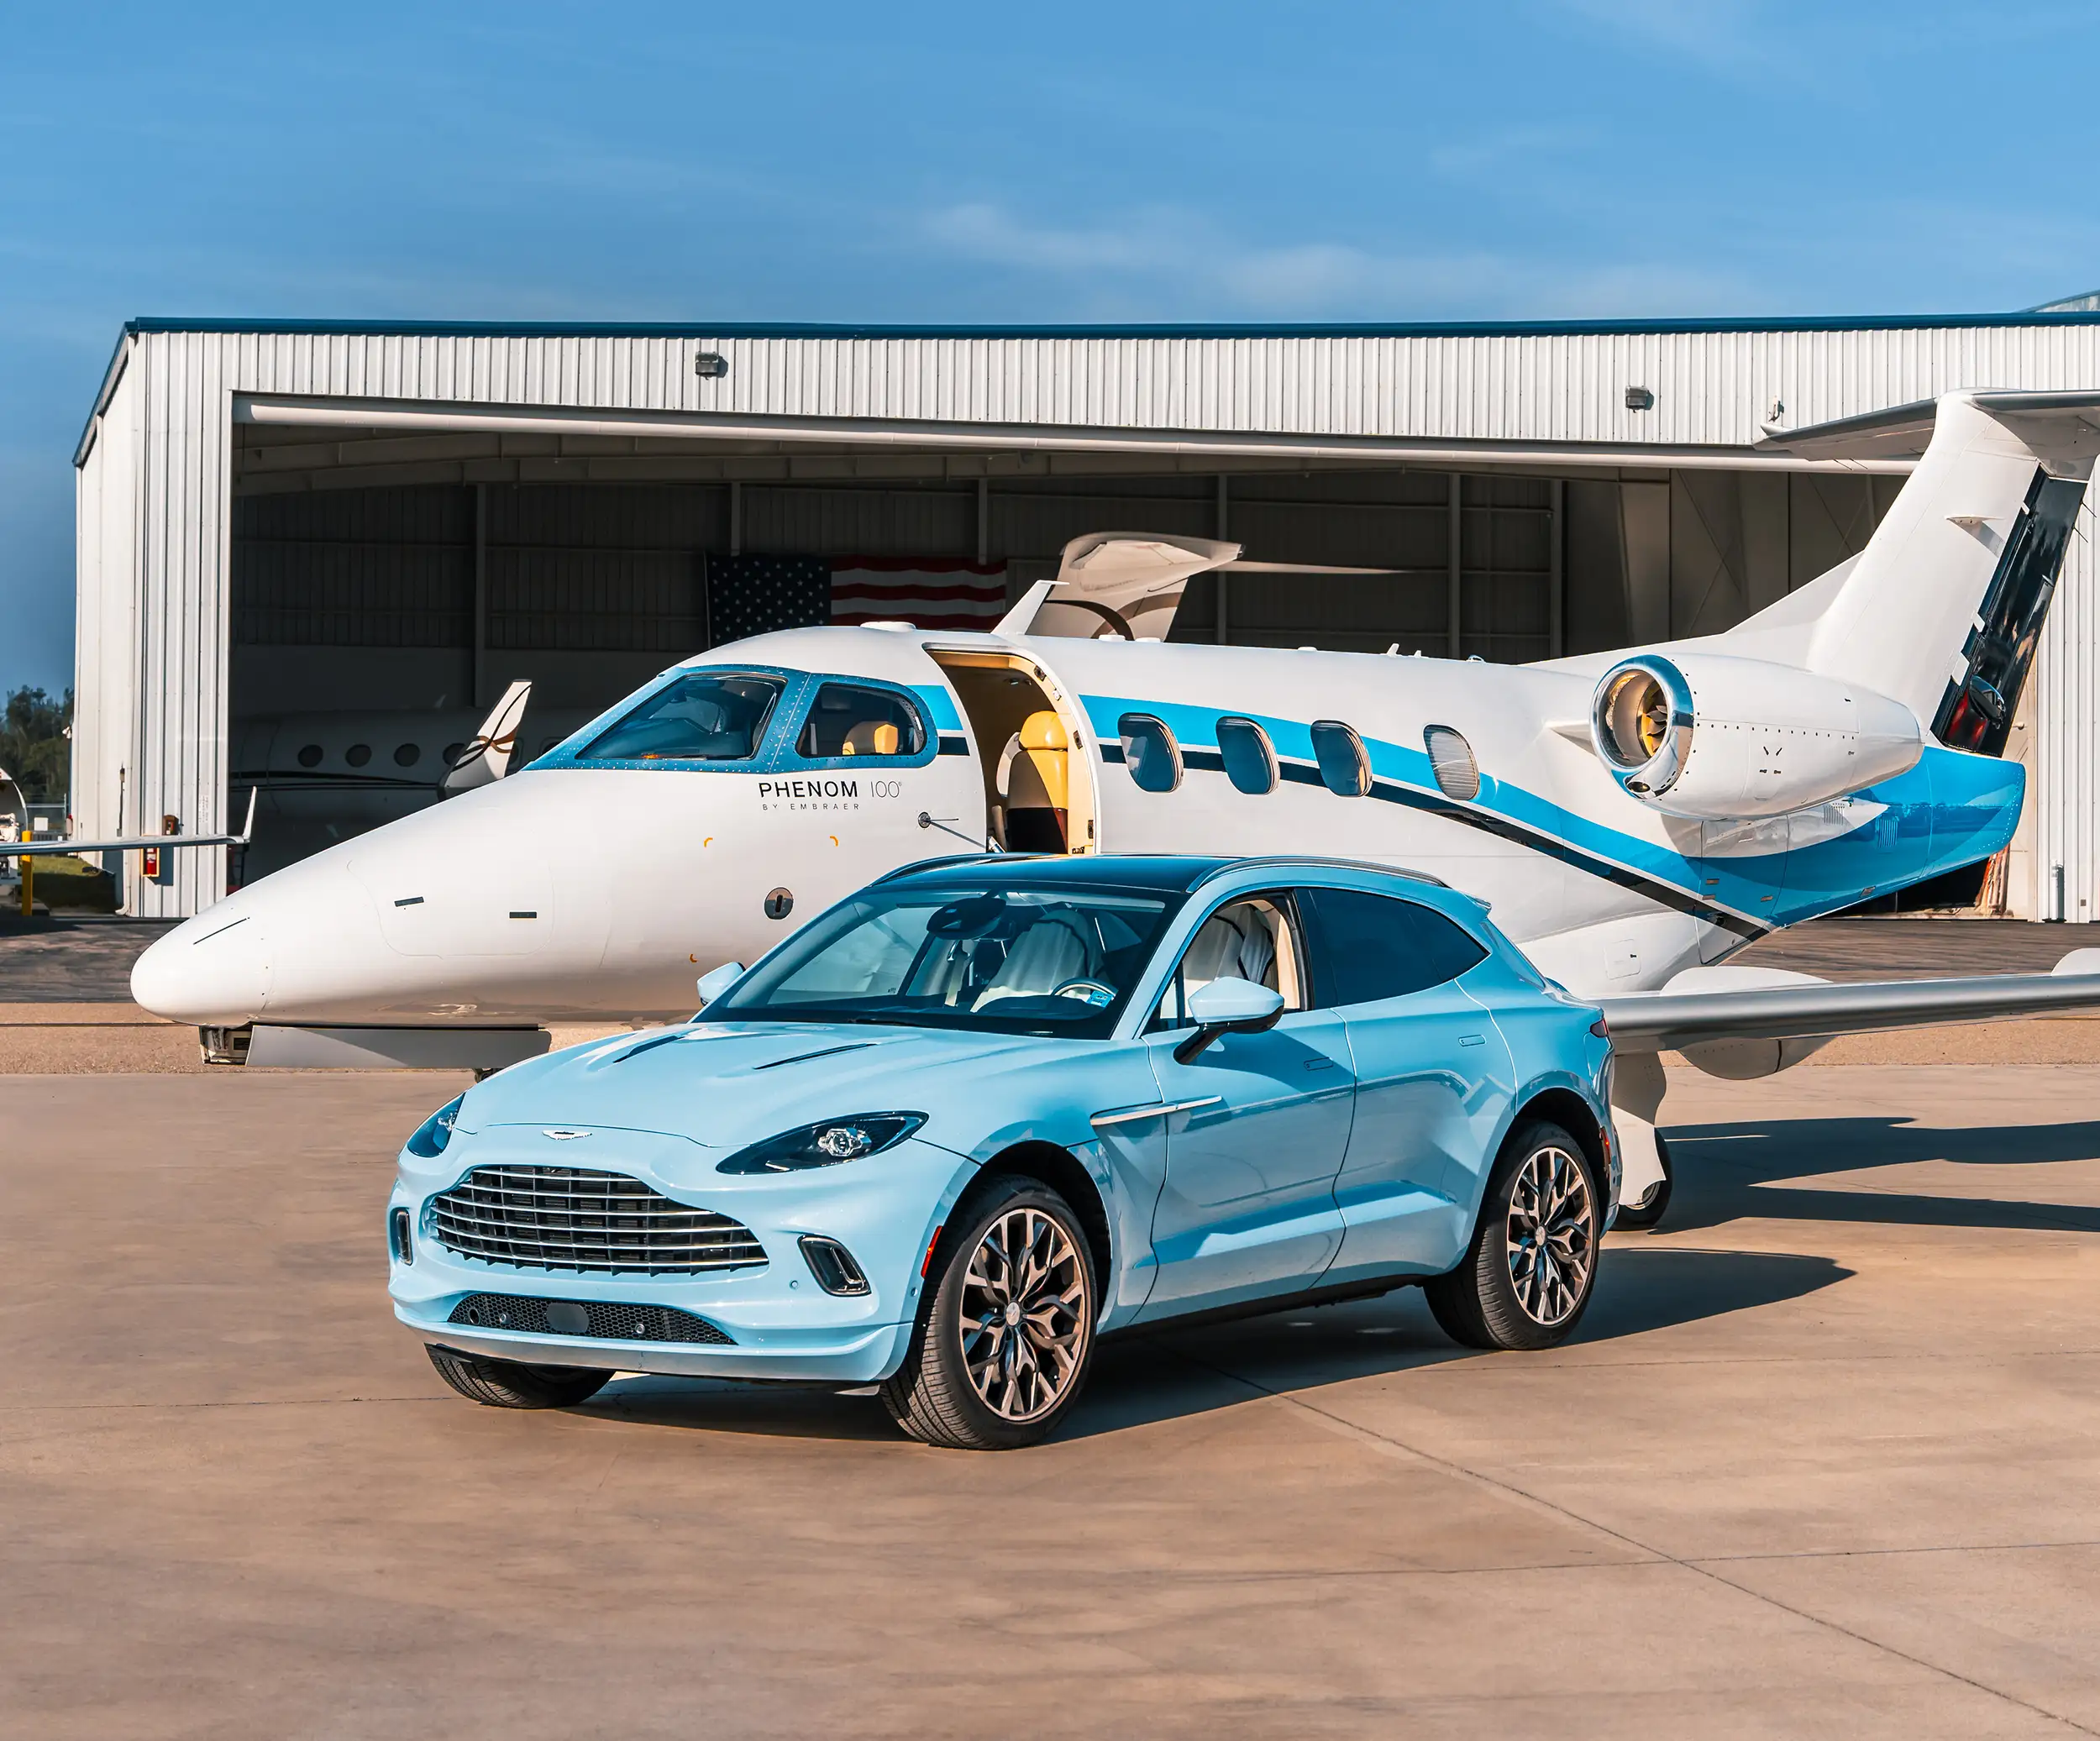 Jet and blue SUV